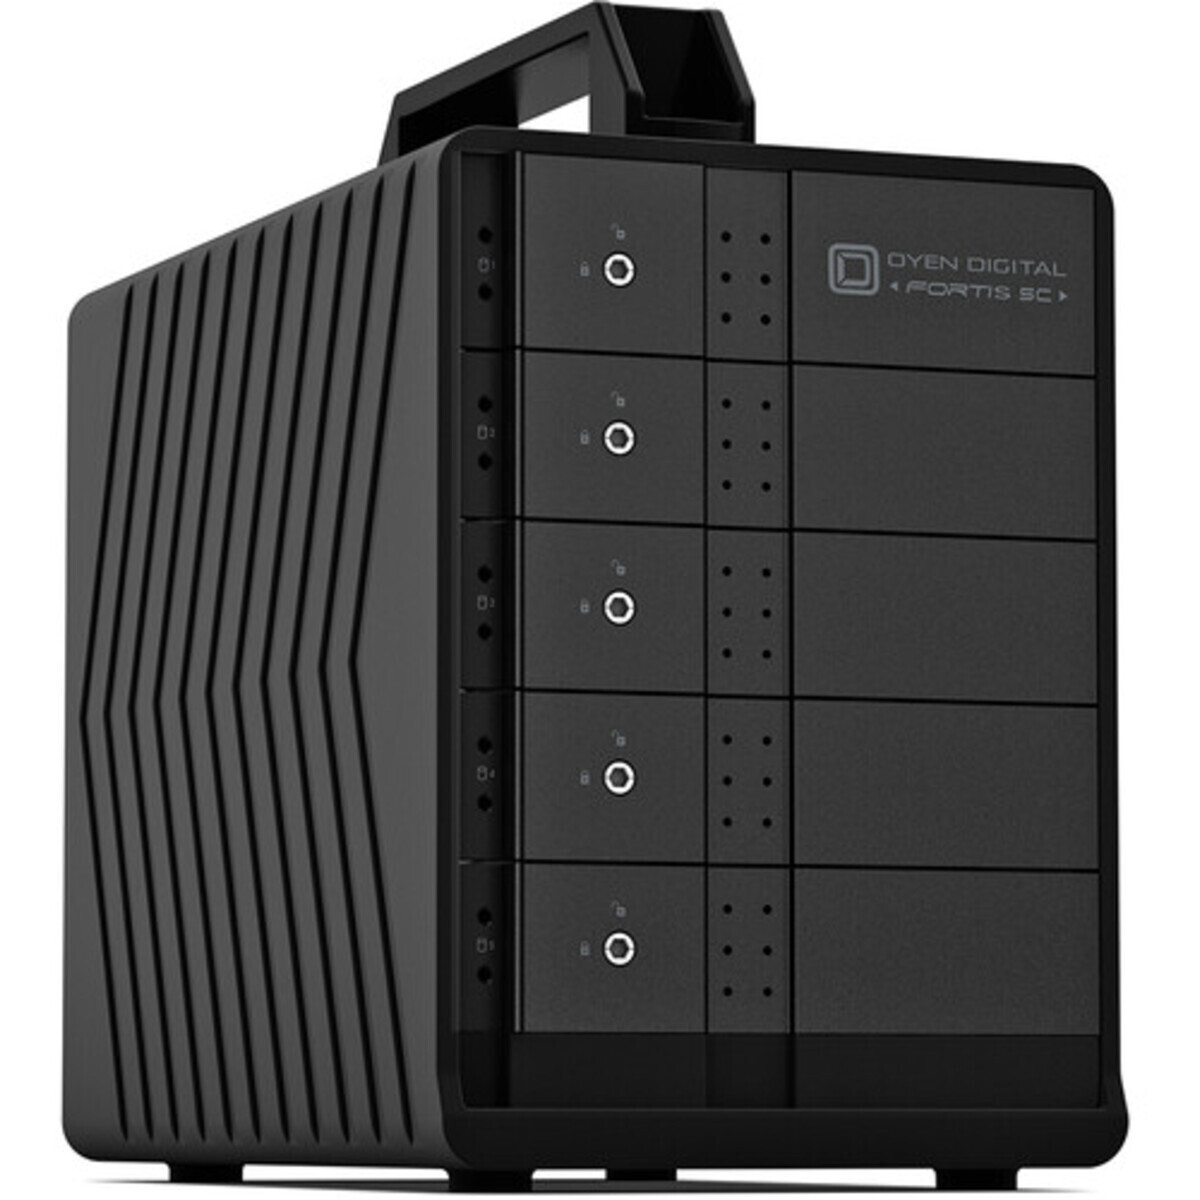 OYEN Fortis 5C 30tb 5-Bay Desktop Multimedia / Power User / Business DAS - Direct Attached Storage Device 5x6tb Western Digital Red Plus WD60EFPX 3.5 5640rpm SATA 6Gb/s HDD NAS Class Drives Installed - Burn-In Tested Fortis 5C